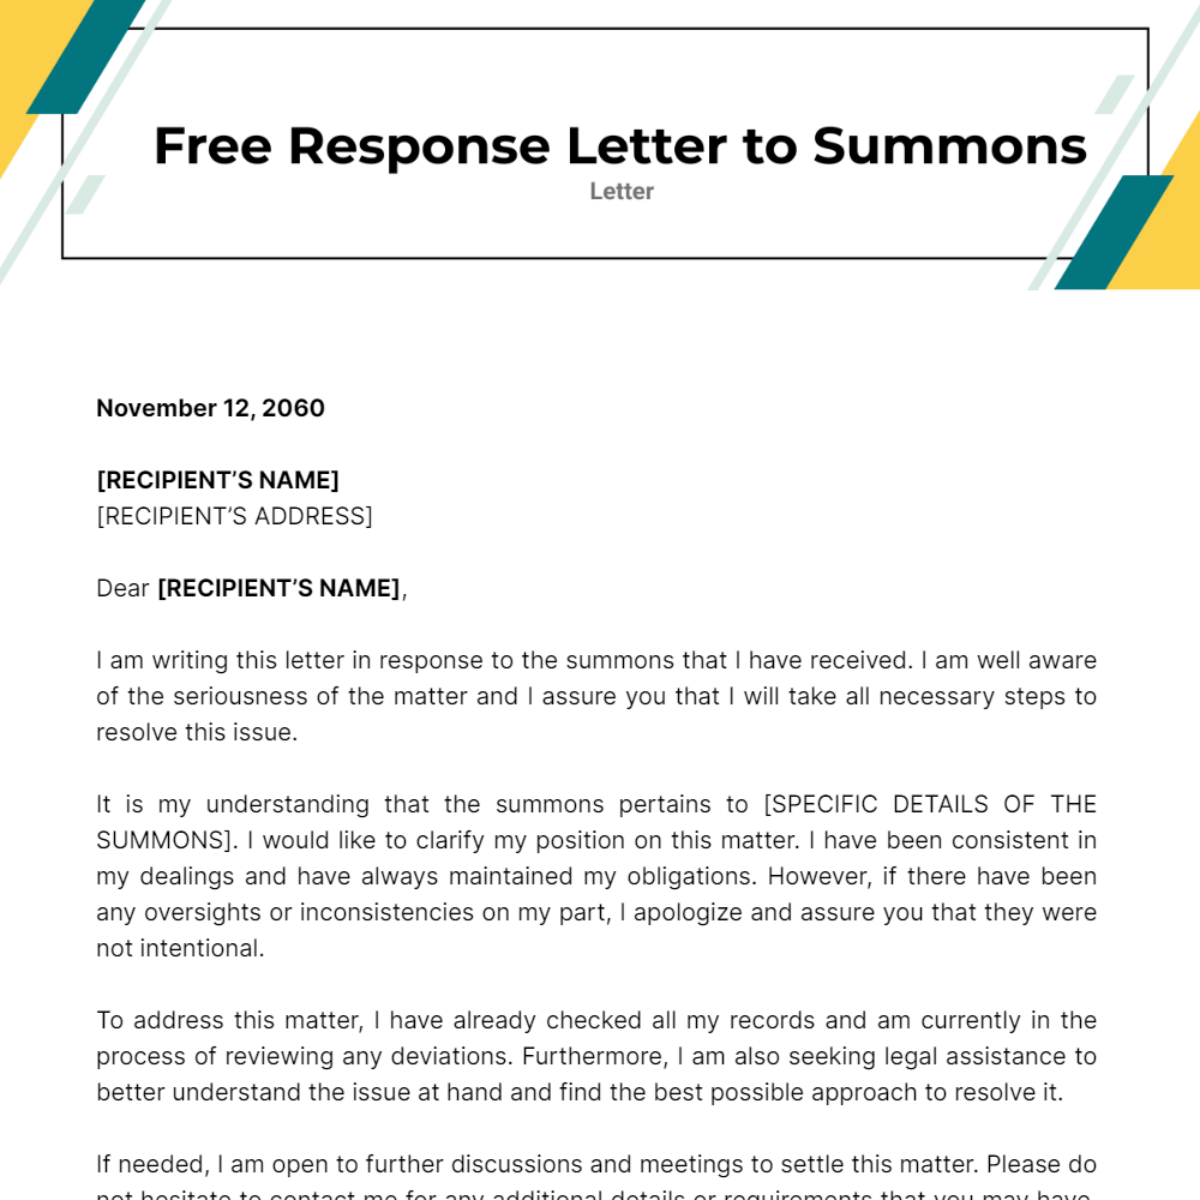 Free Response Letter to Summons